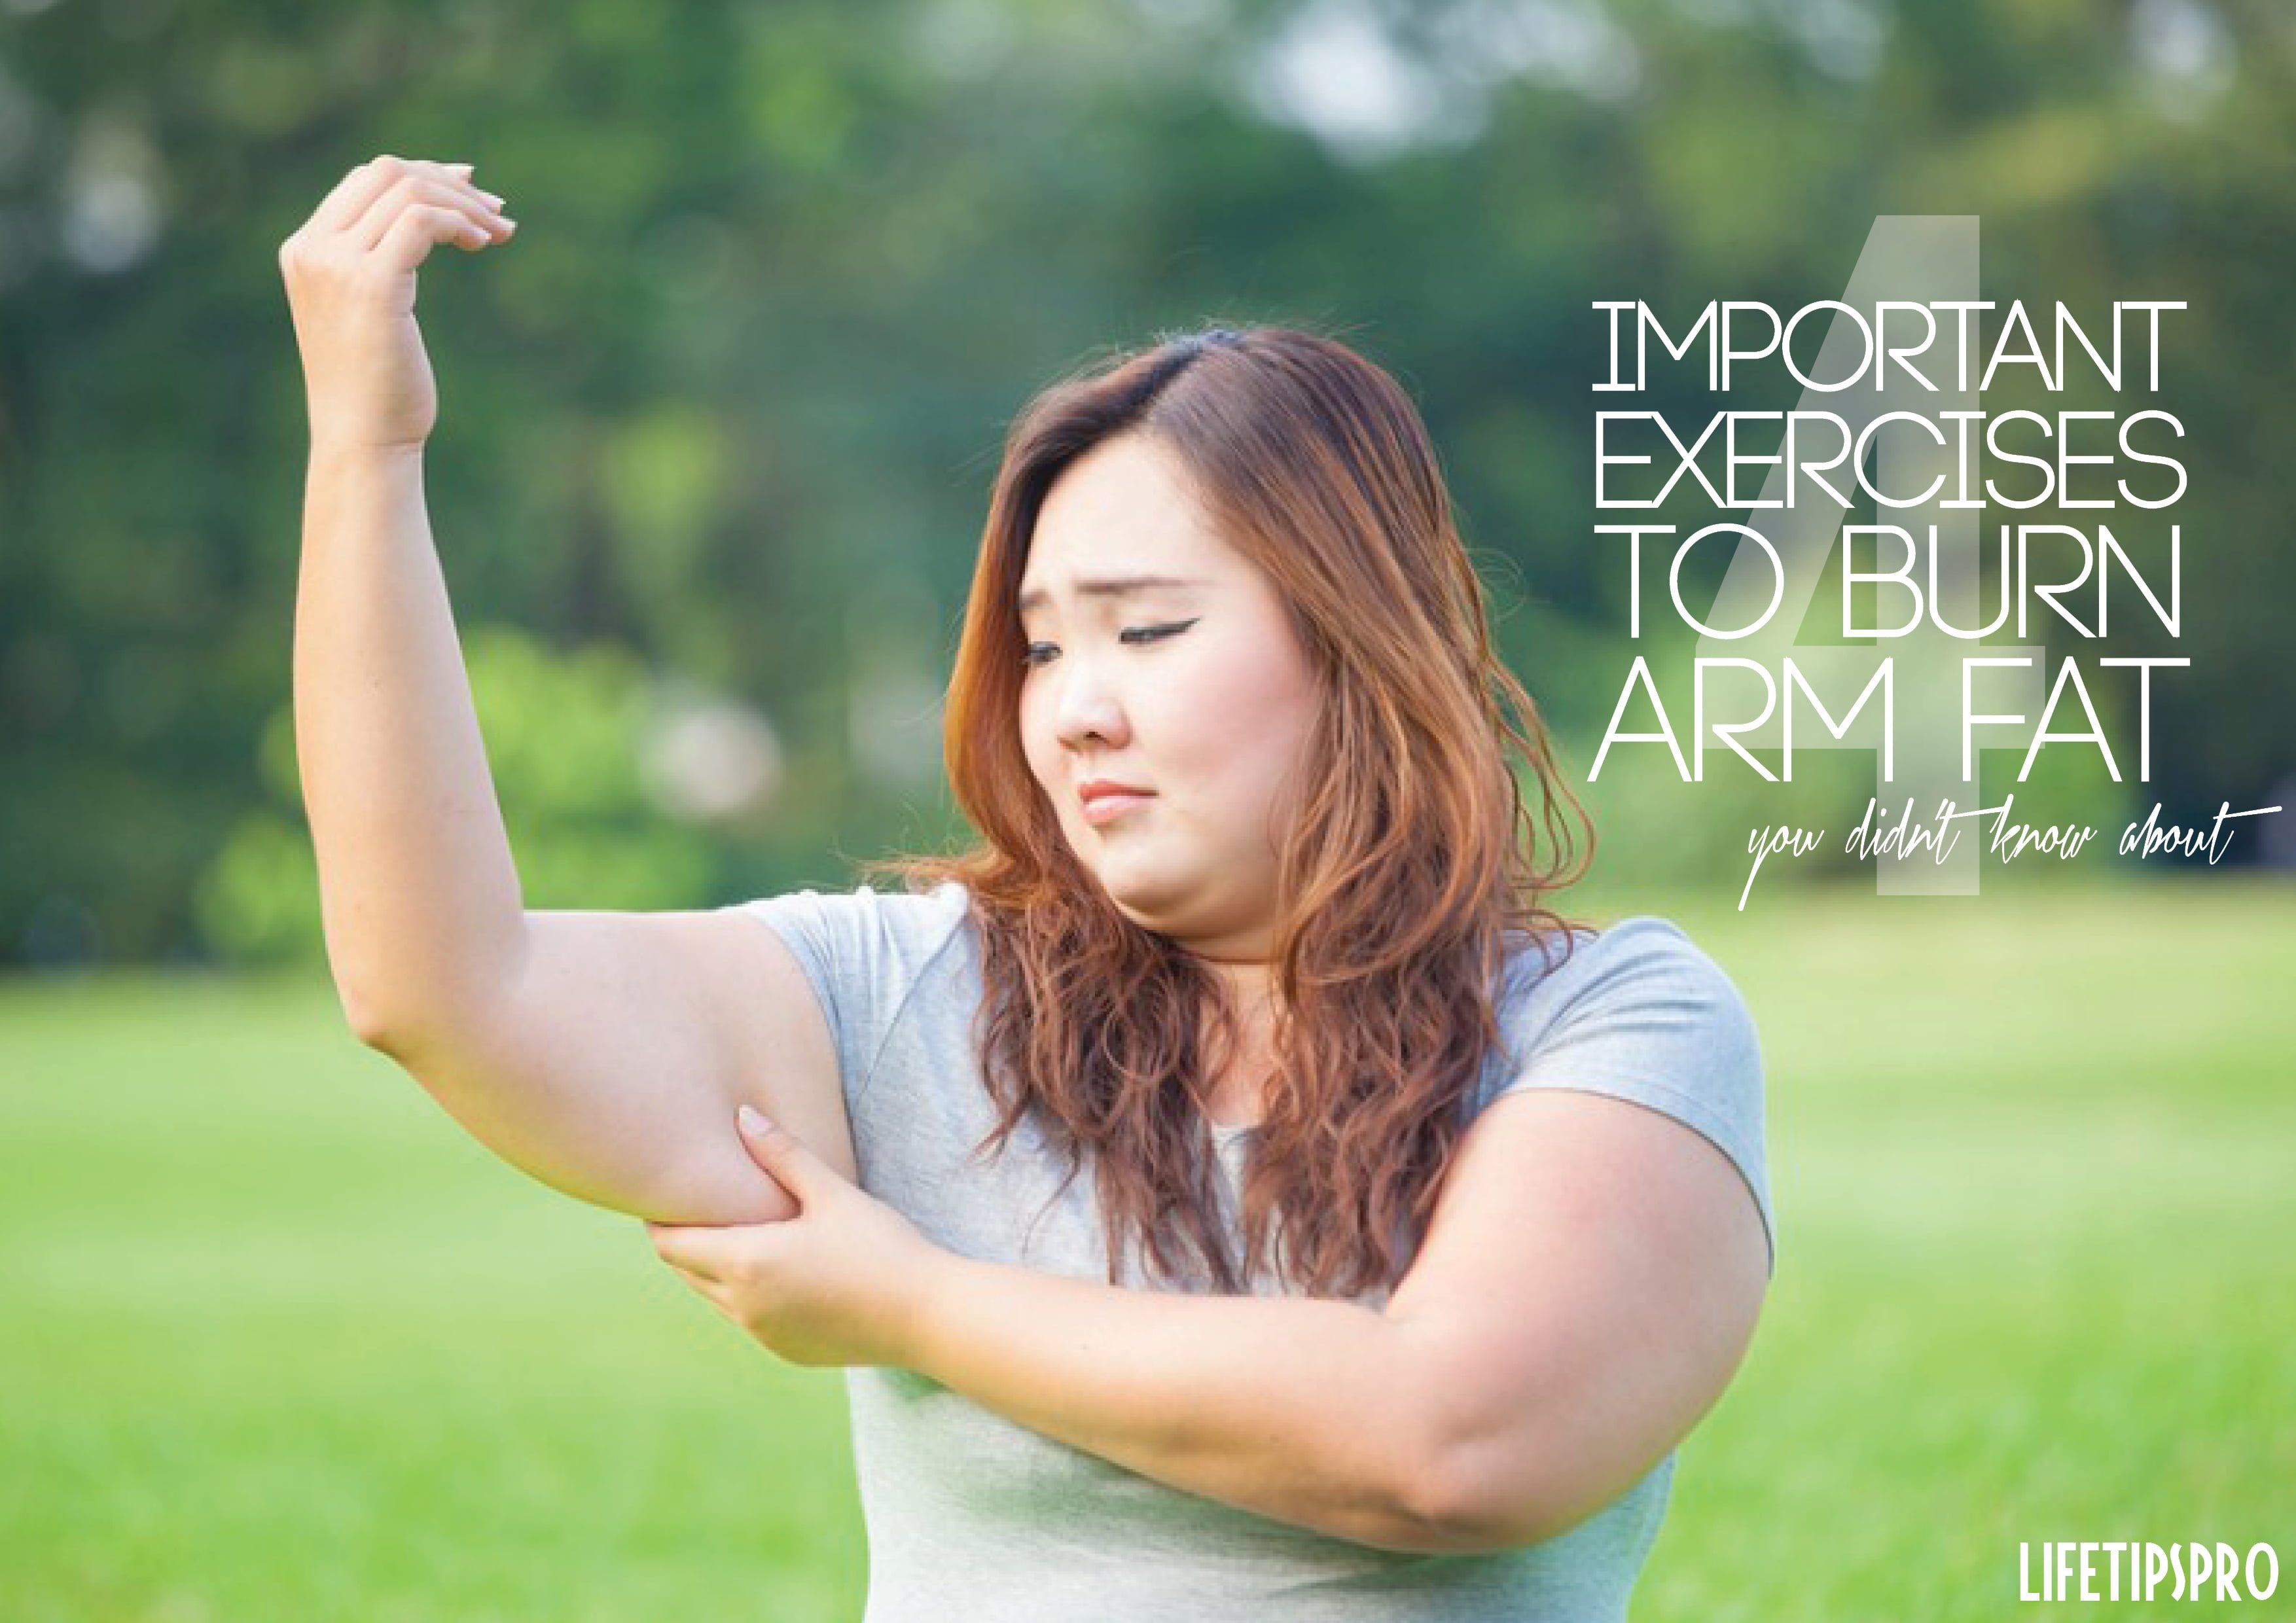 How to lose arm fat? 4 best exercise to get toned arms fast.